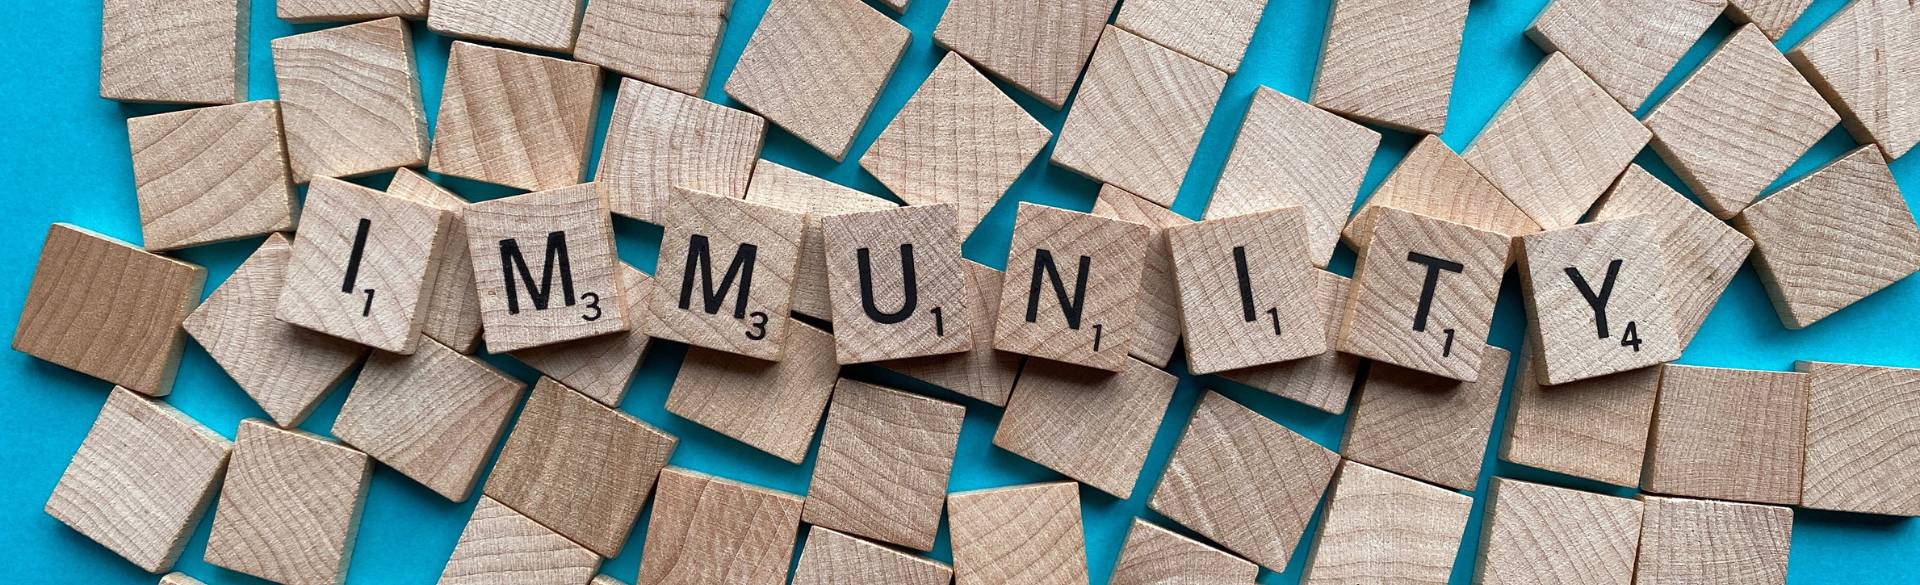 Immunity spelled out in Scrabble tiles